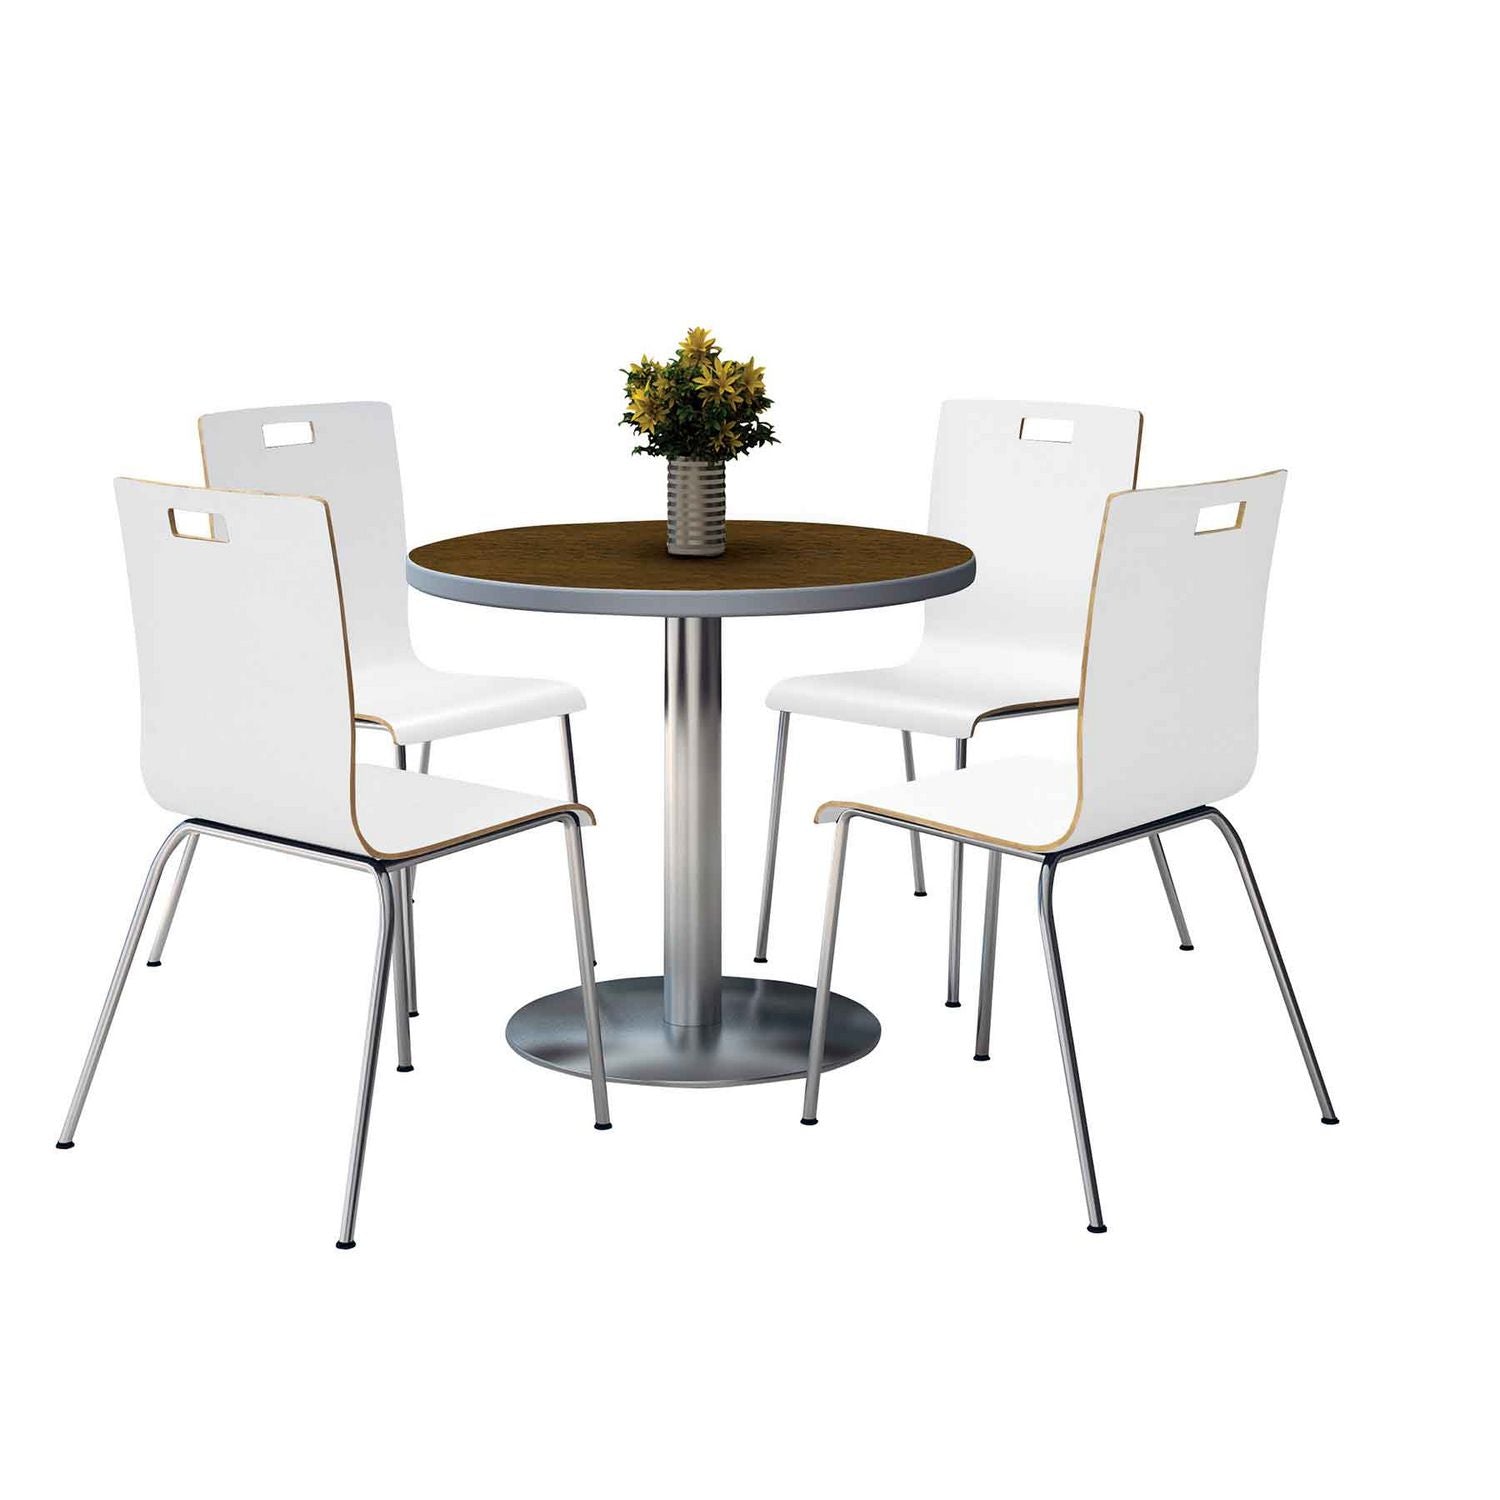 pedestal-table-with-four-white-jive-series-chairs-round-36-dia-x-29h-walnut-ships-in-4-6-business-days_kfi810389025088 - 1